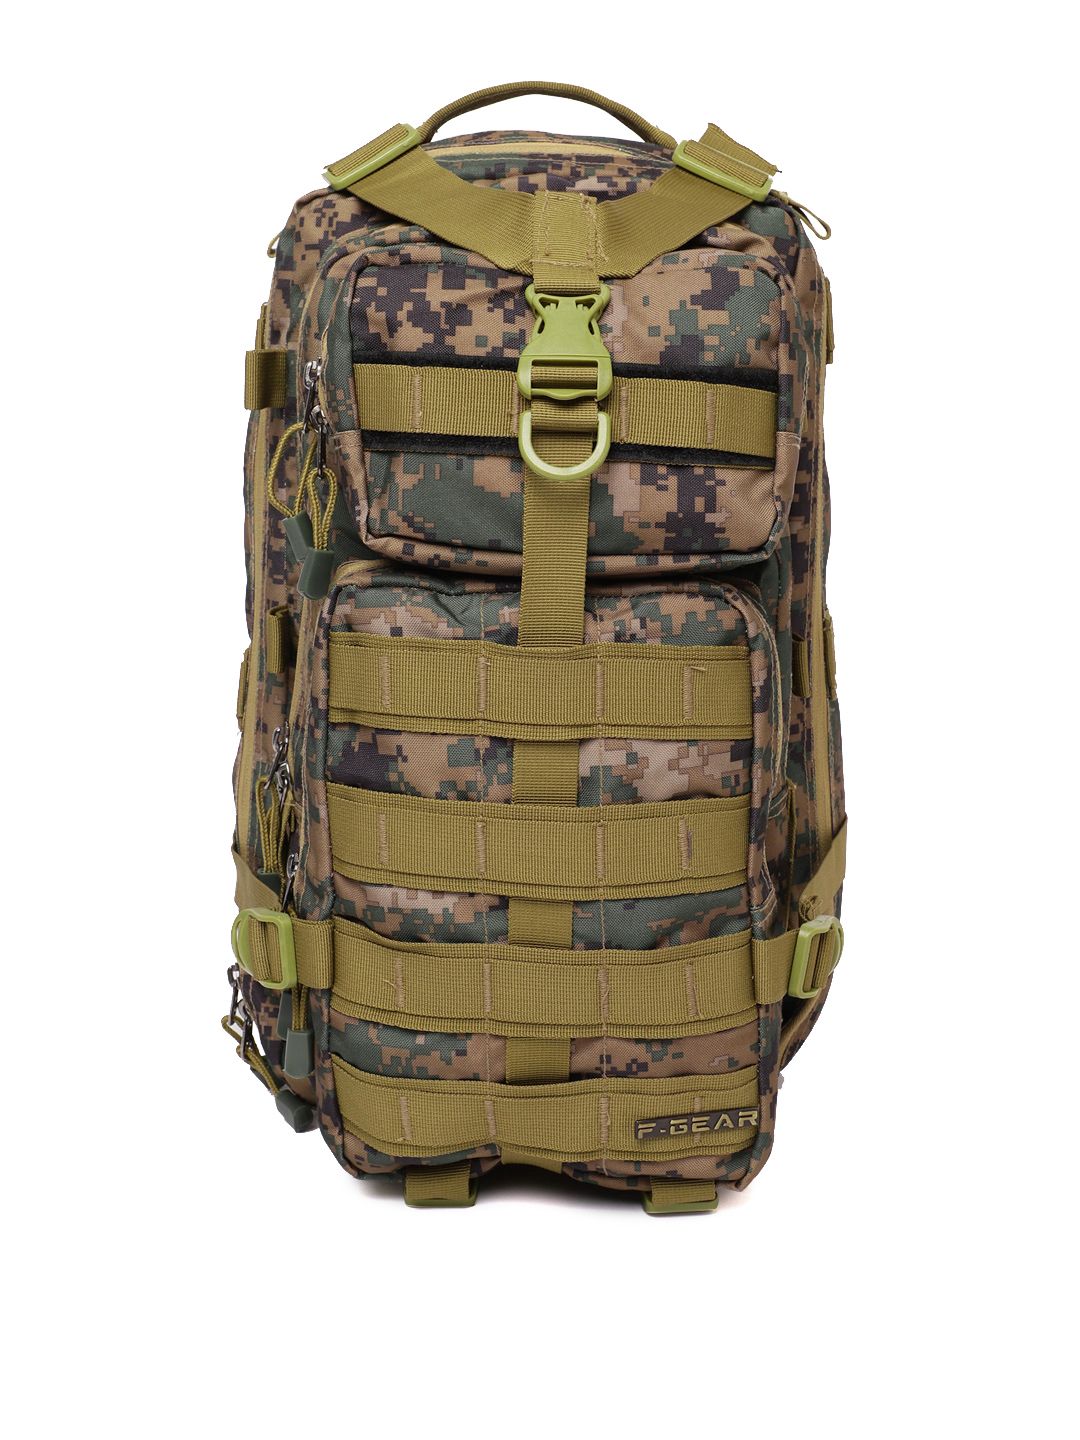 F Gear Unisex Green & Brown Military Tactical Marpat Graphic Printed Backpack Price in India